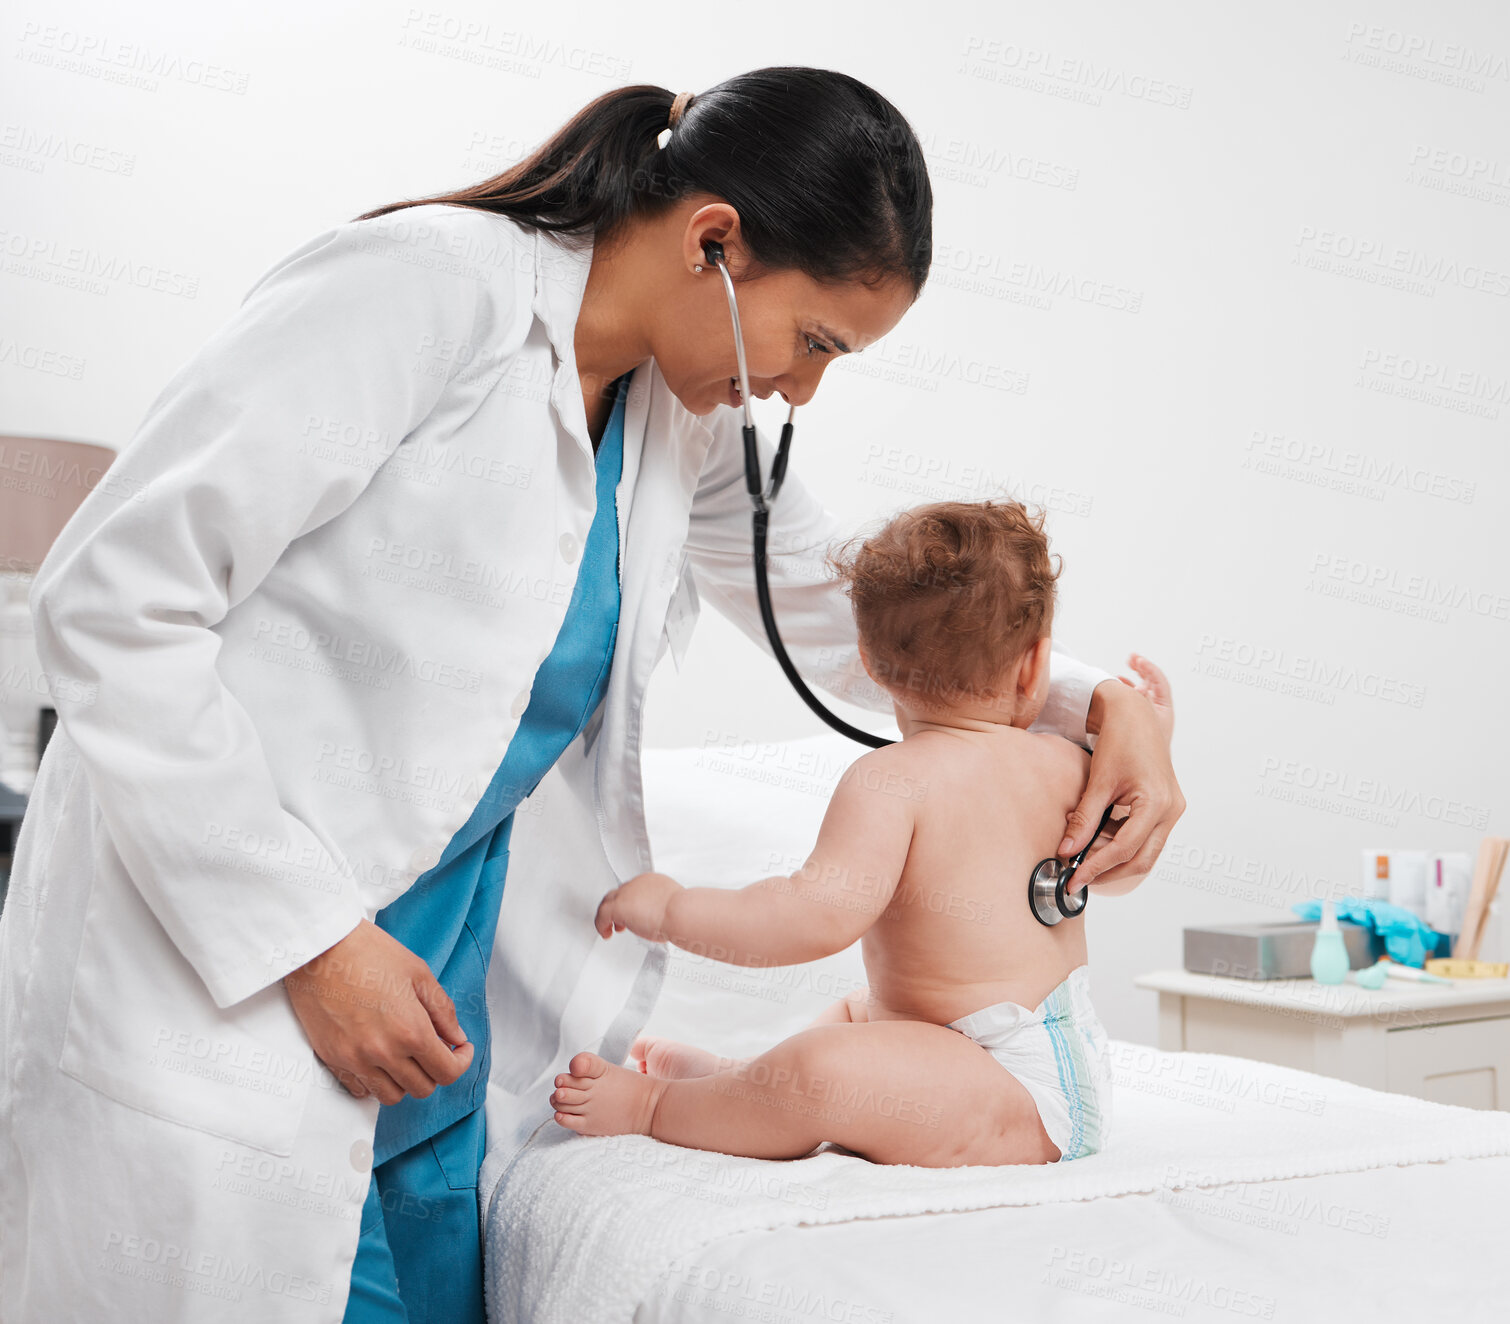 Buy stock photo Shot of a paediatrician examining a baby in a clinic